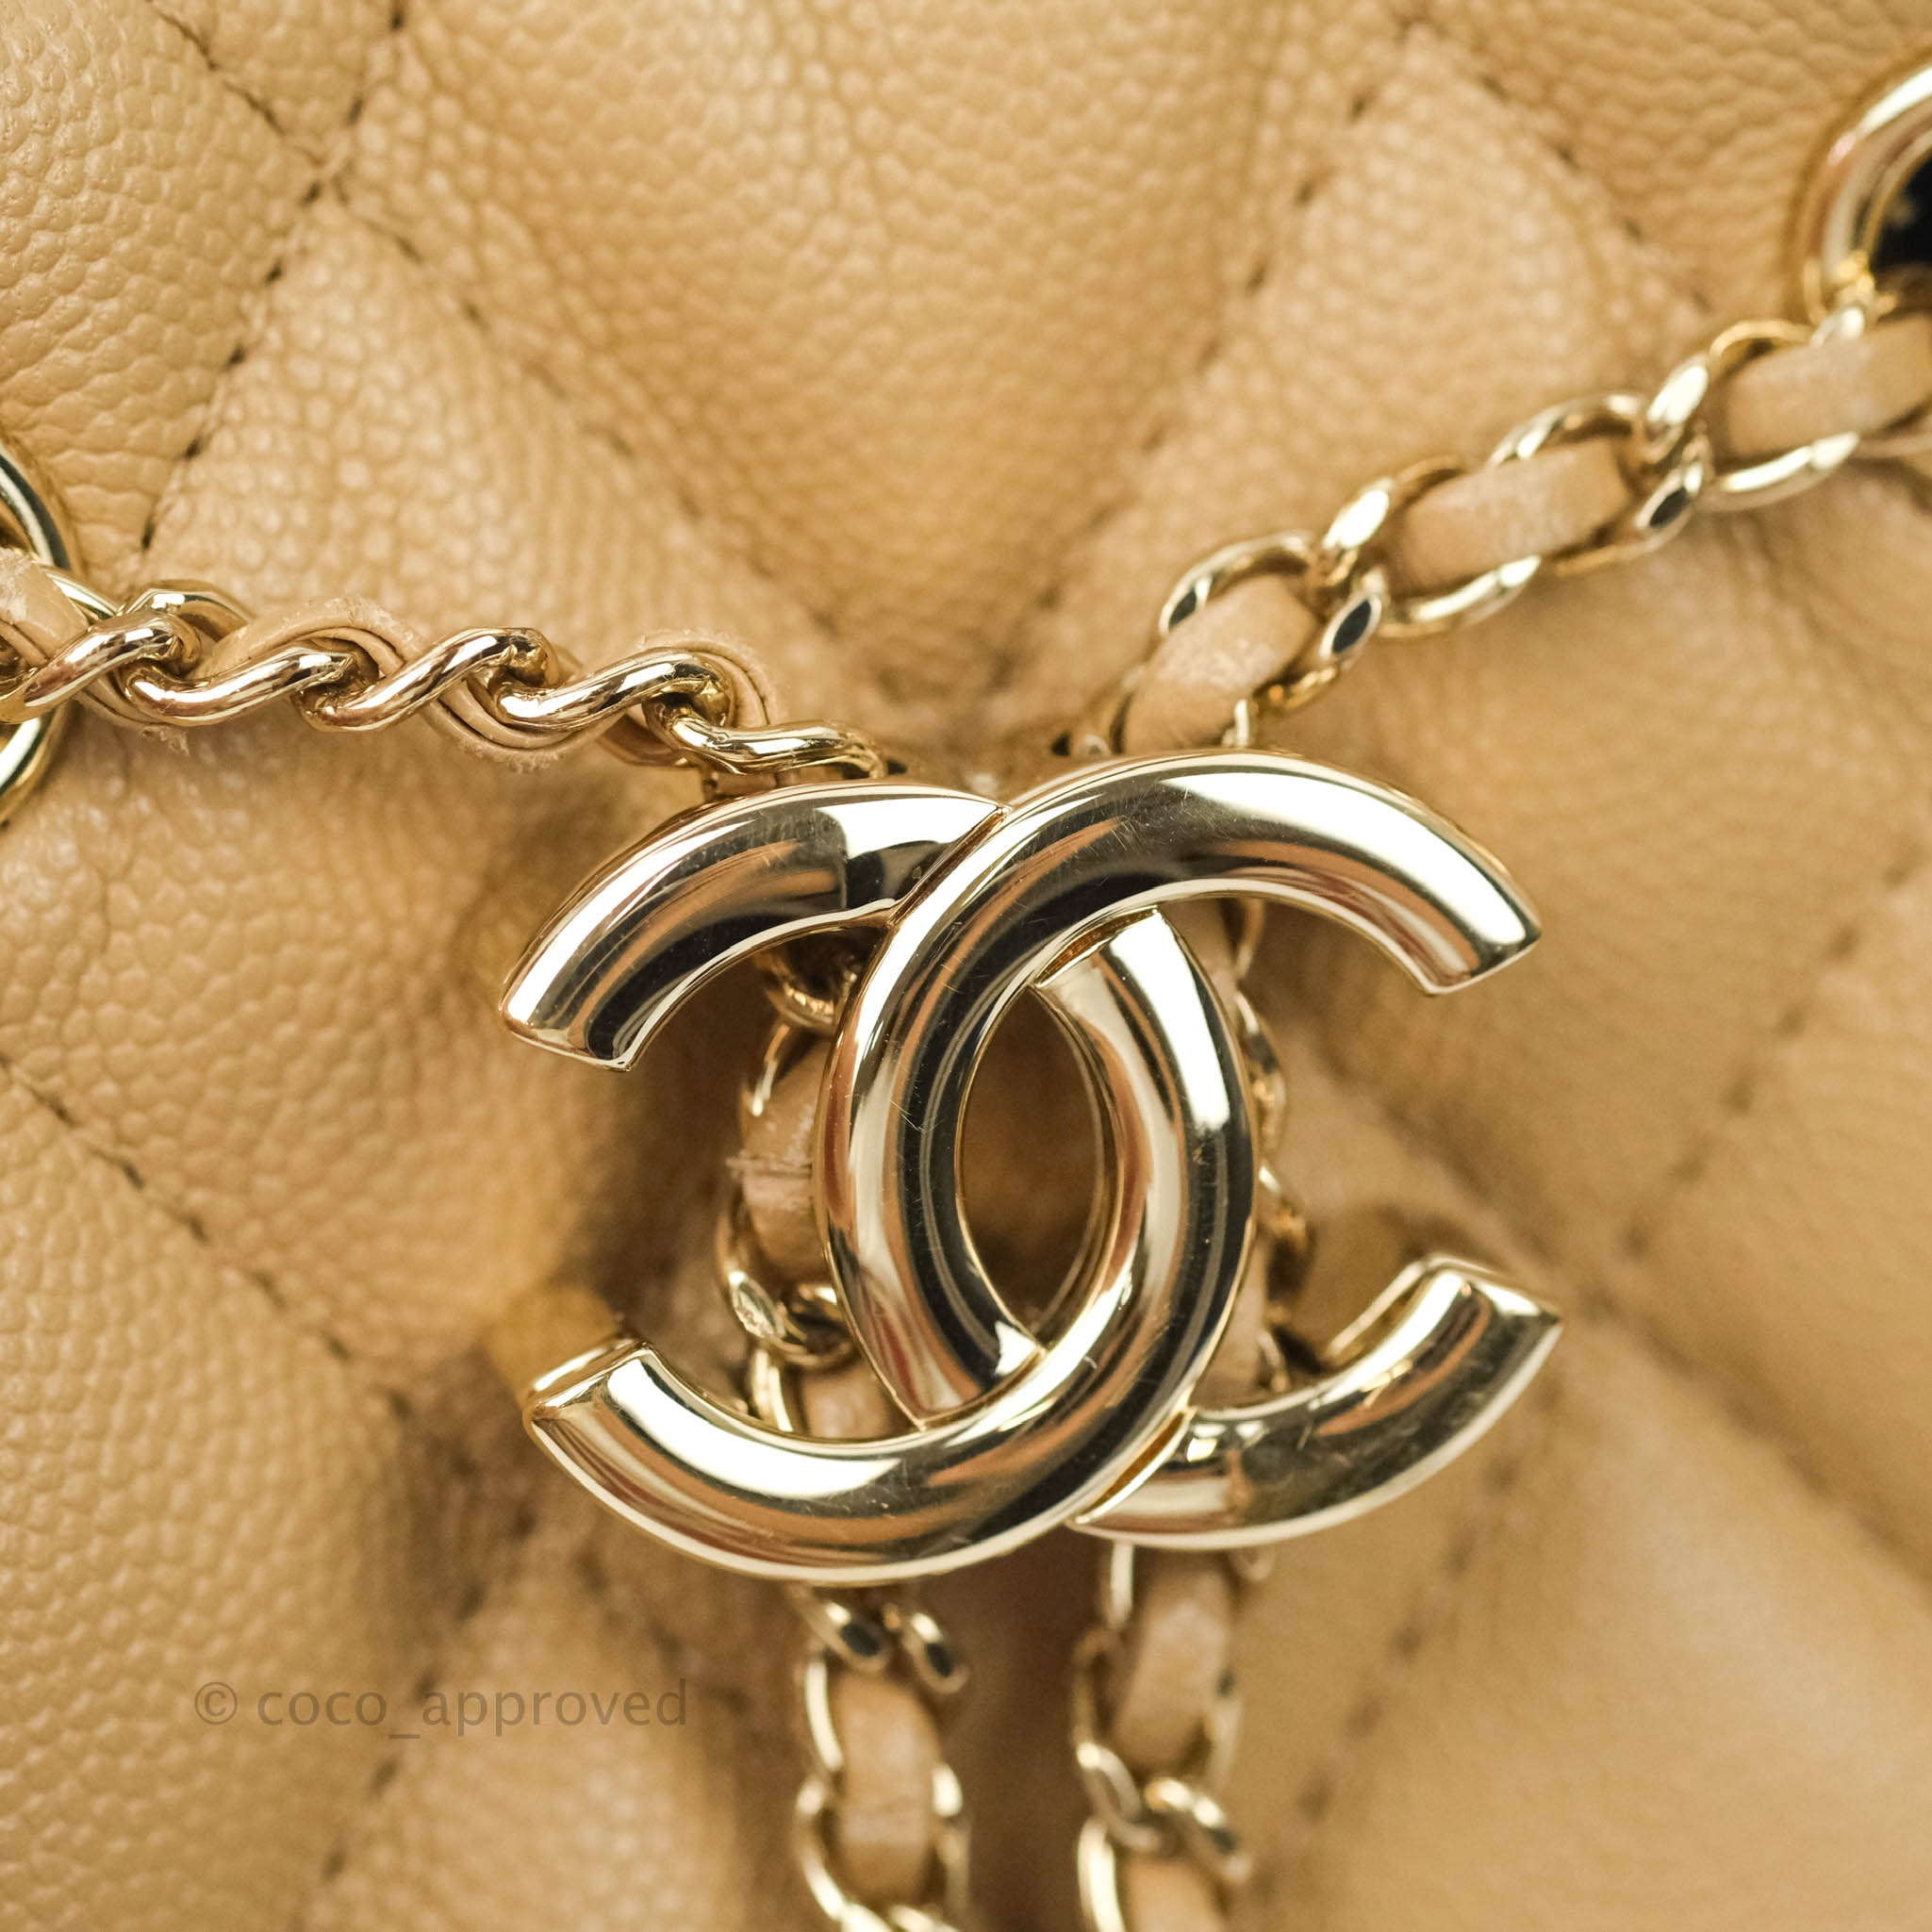 The plastic Chanel clutch with a £5,000 price tag set to become